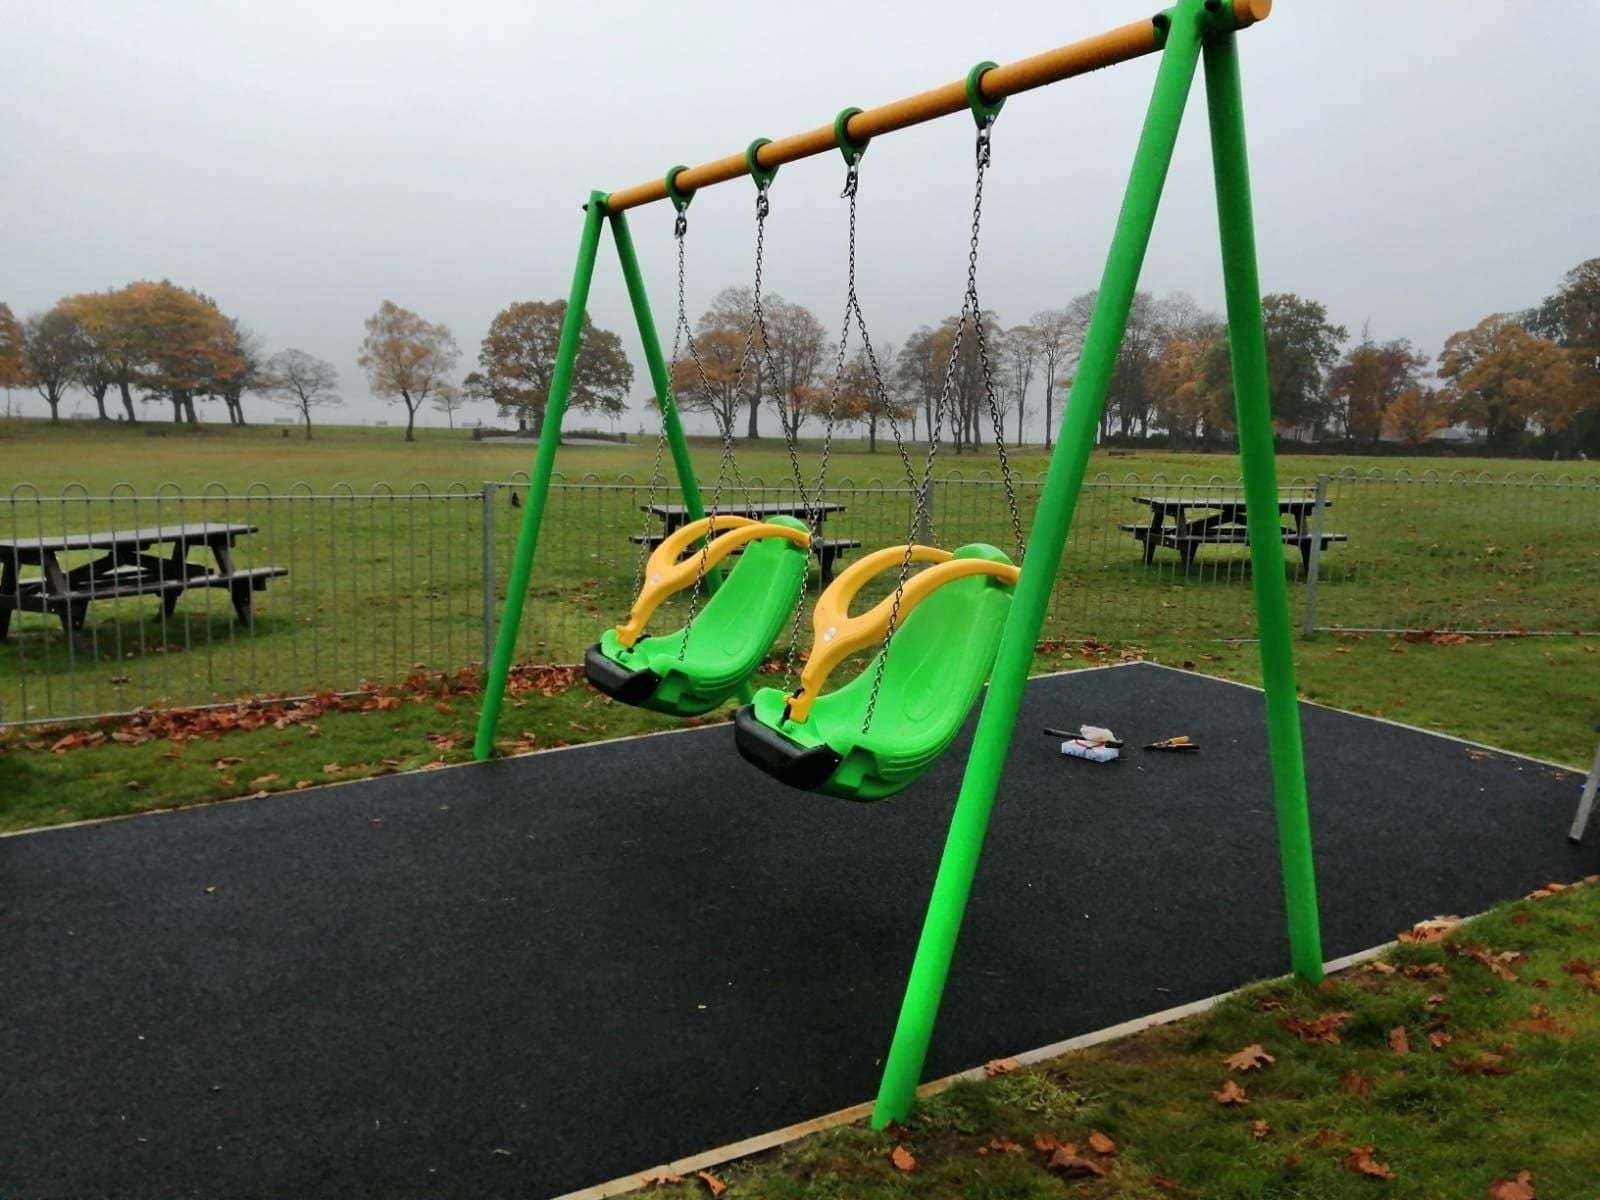 The type of inclusive swings that the Belhelvie Community Trust are looking to install at the play park.